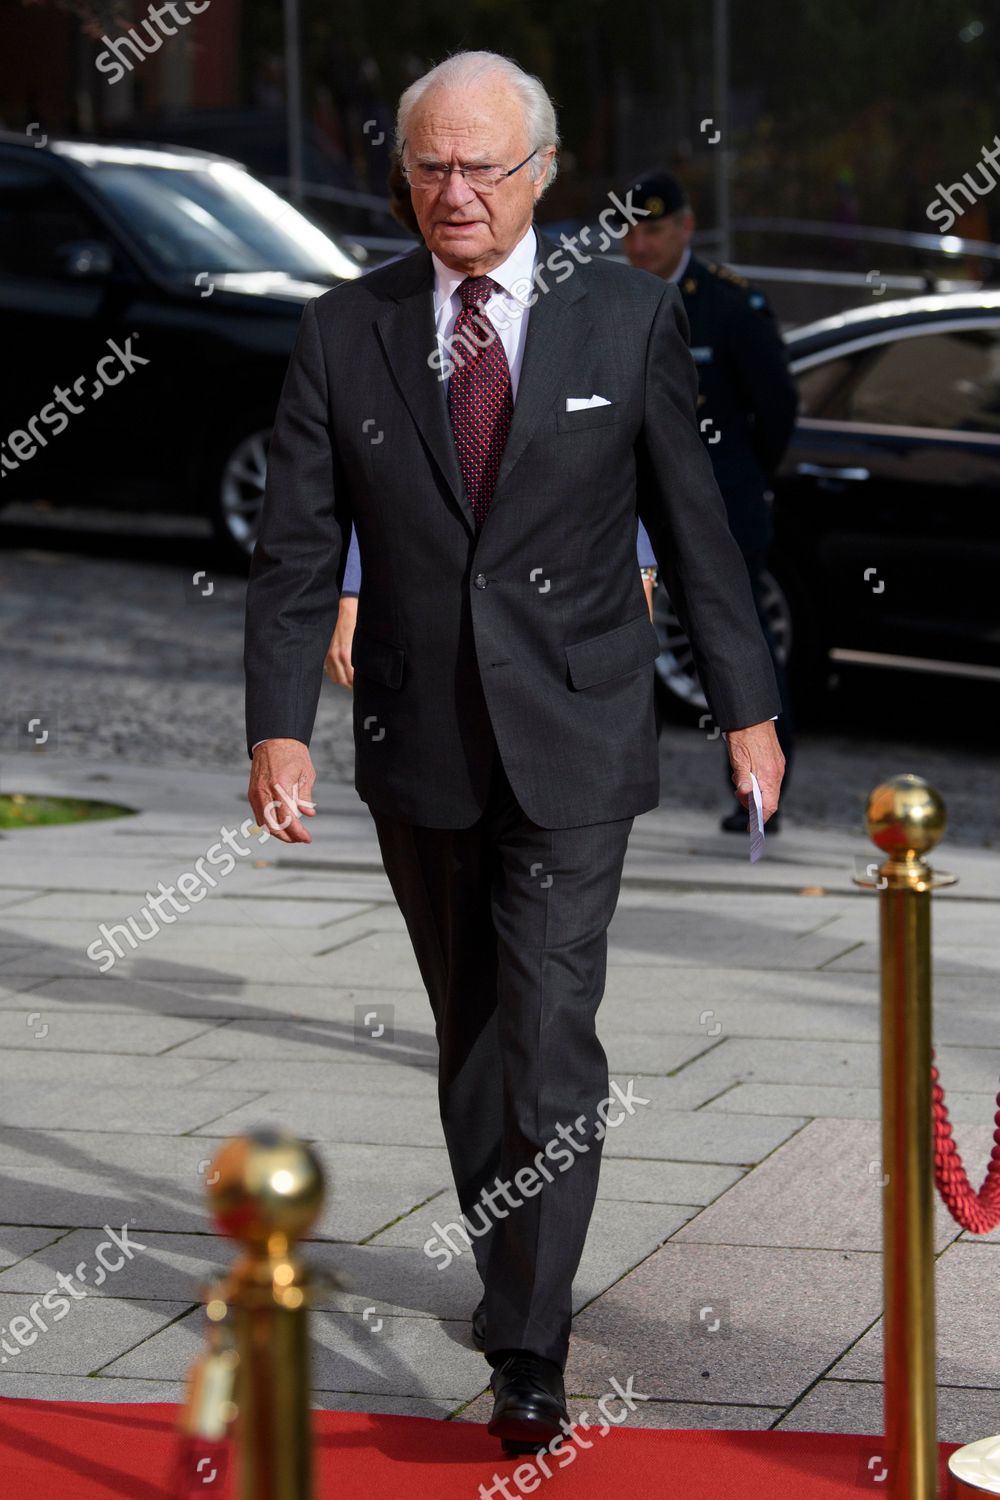 king-carl-gustaf-and-queen-silvia-visit-stockholm-county-sweden-shutterstock-editorial-10952012c.jpg